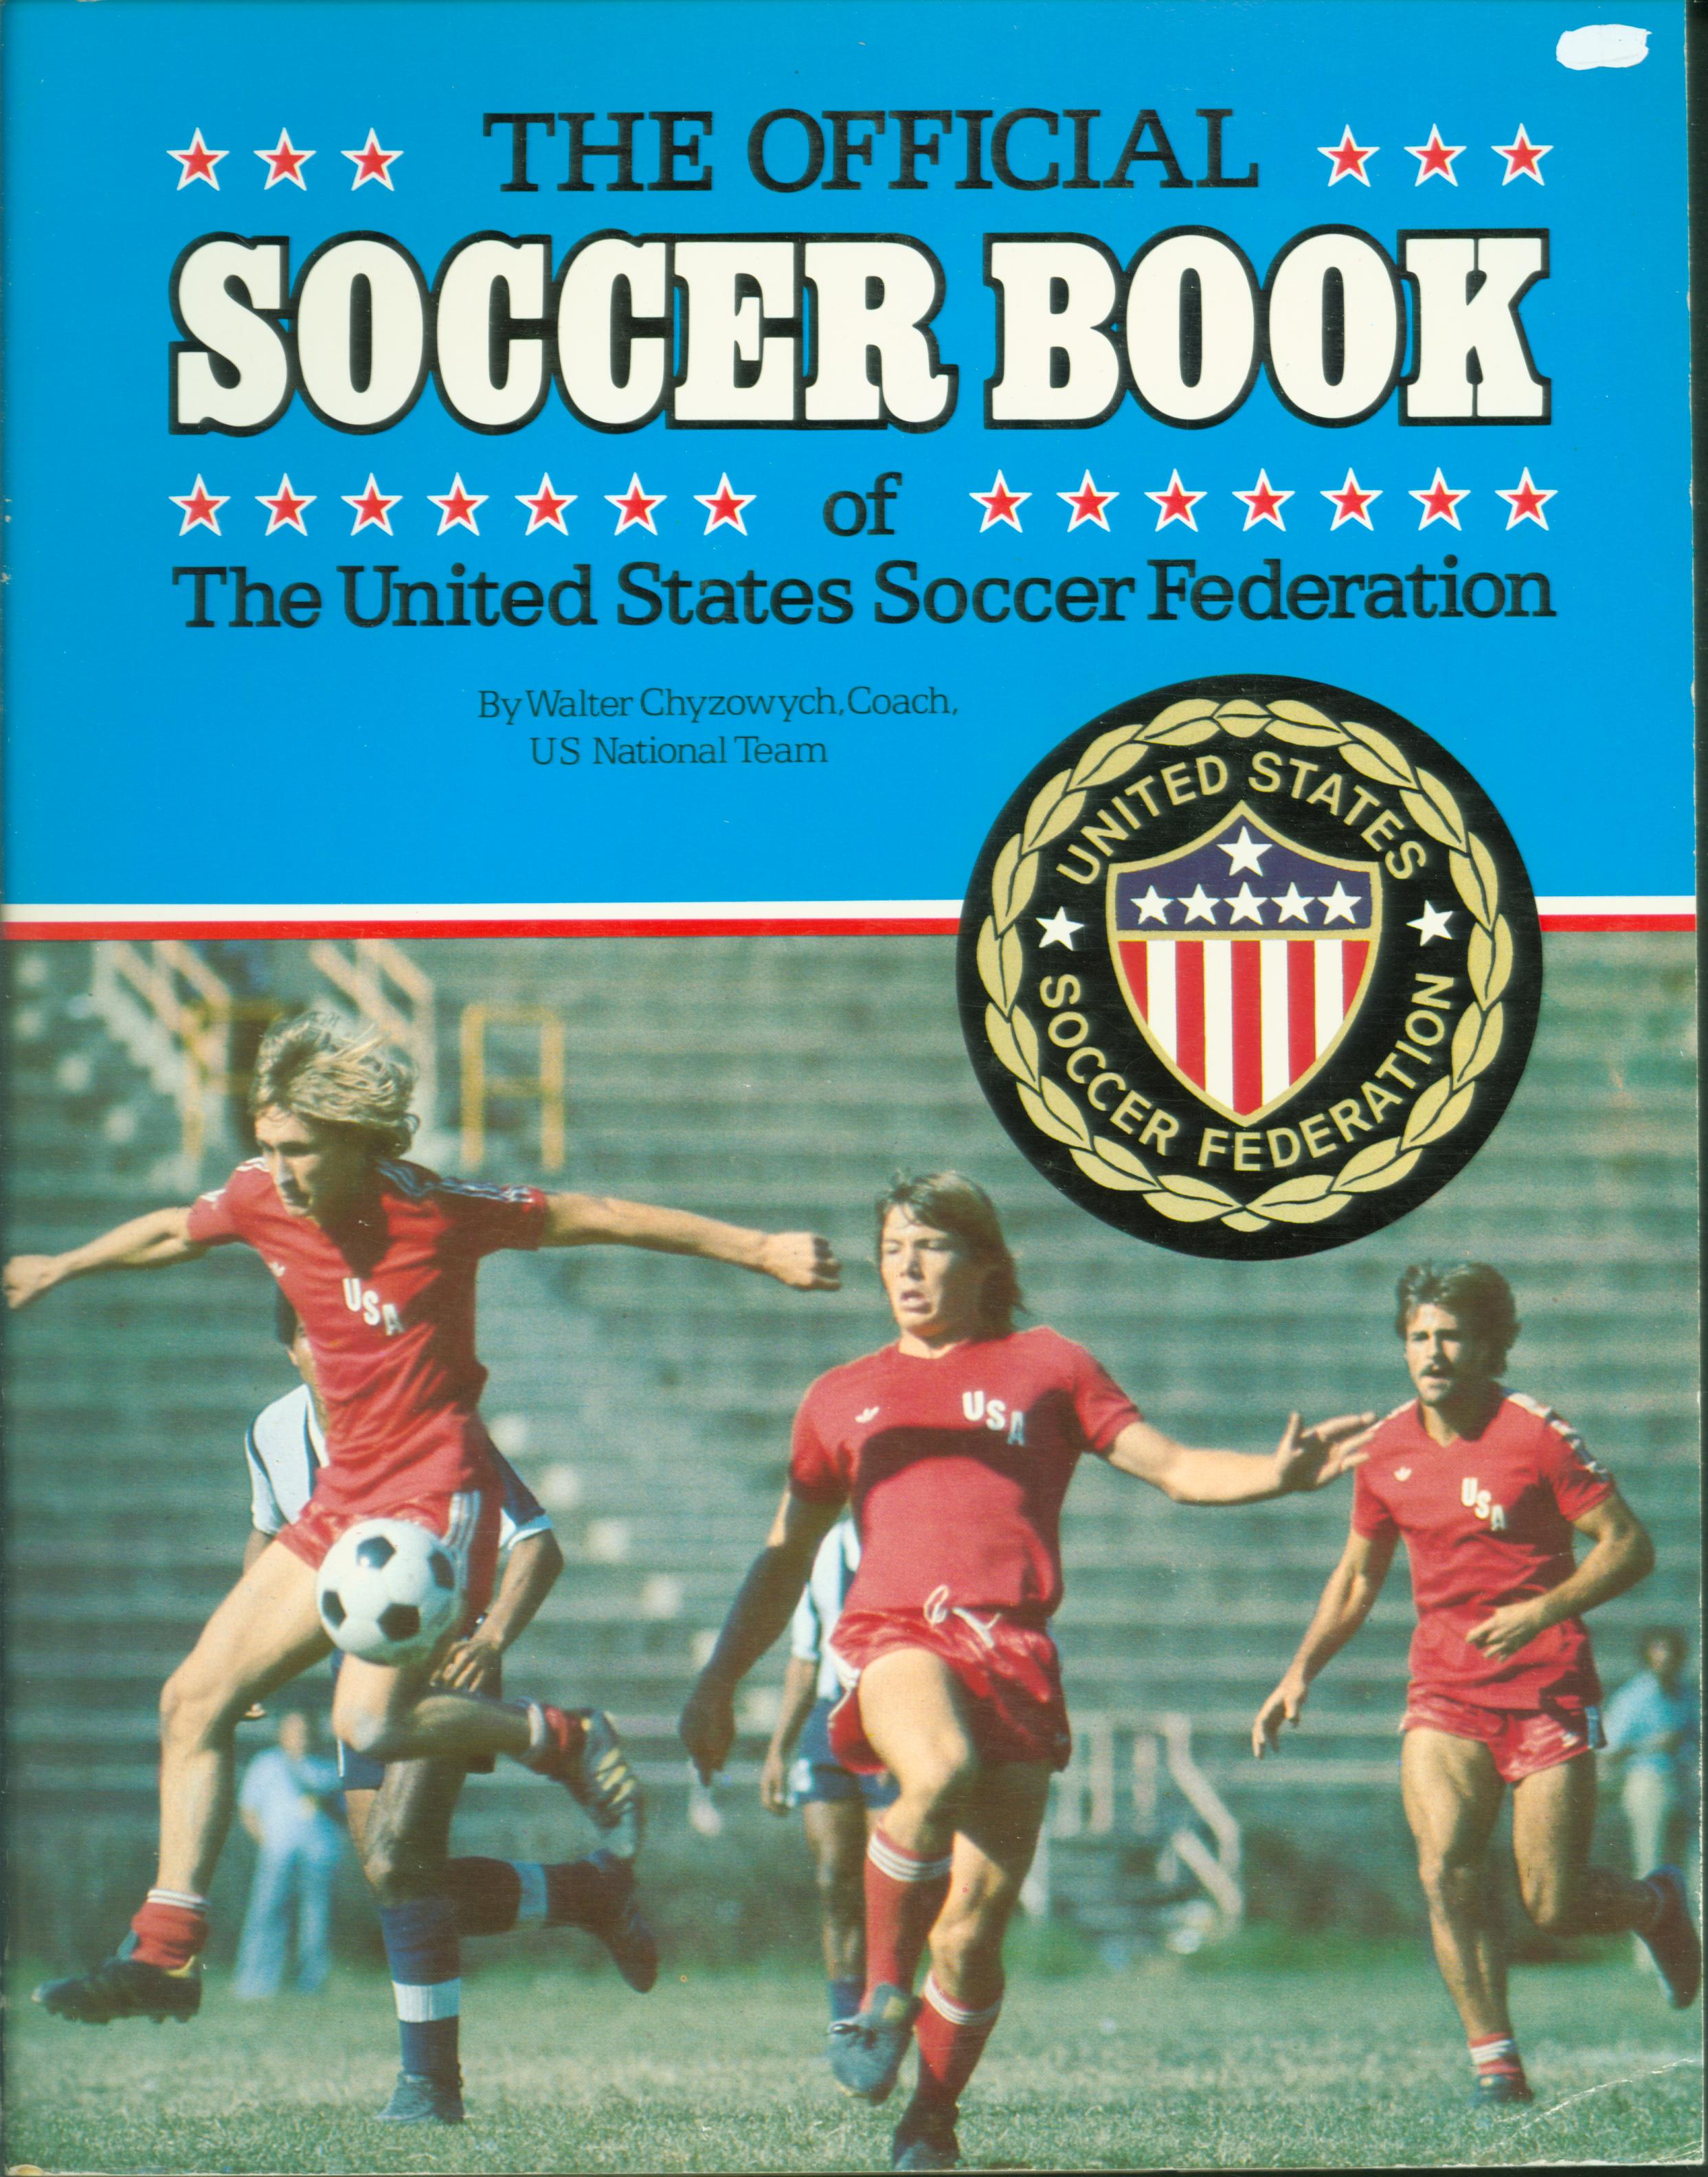 THE OFFICIAL SOCCER BOOK OF THE UNITED STATES SOCCER FEDERATION.